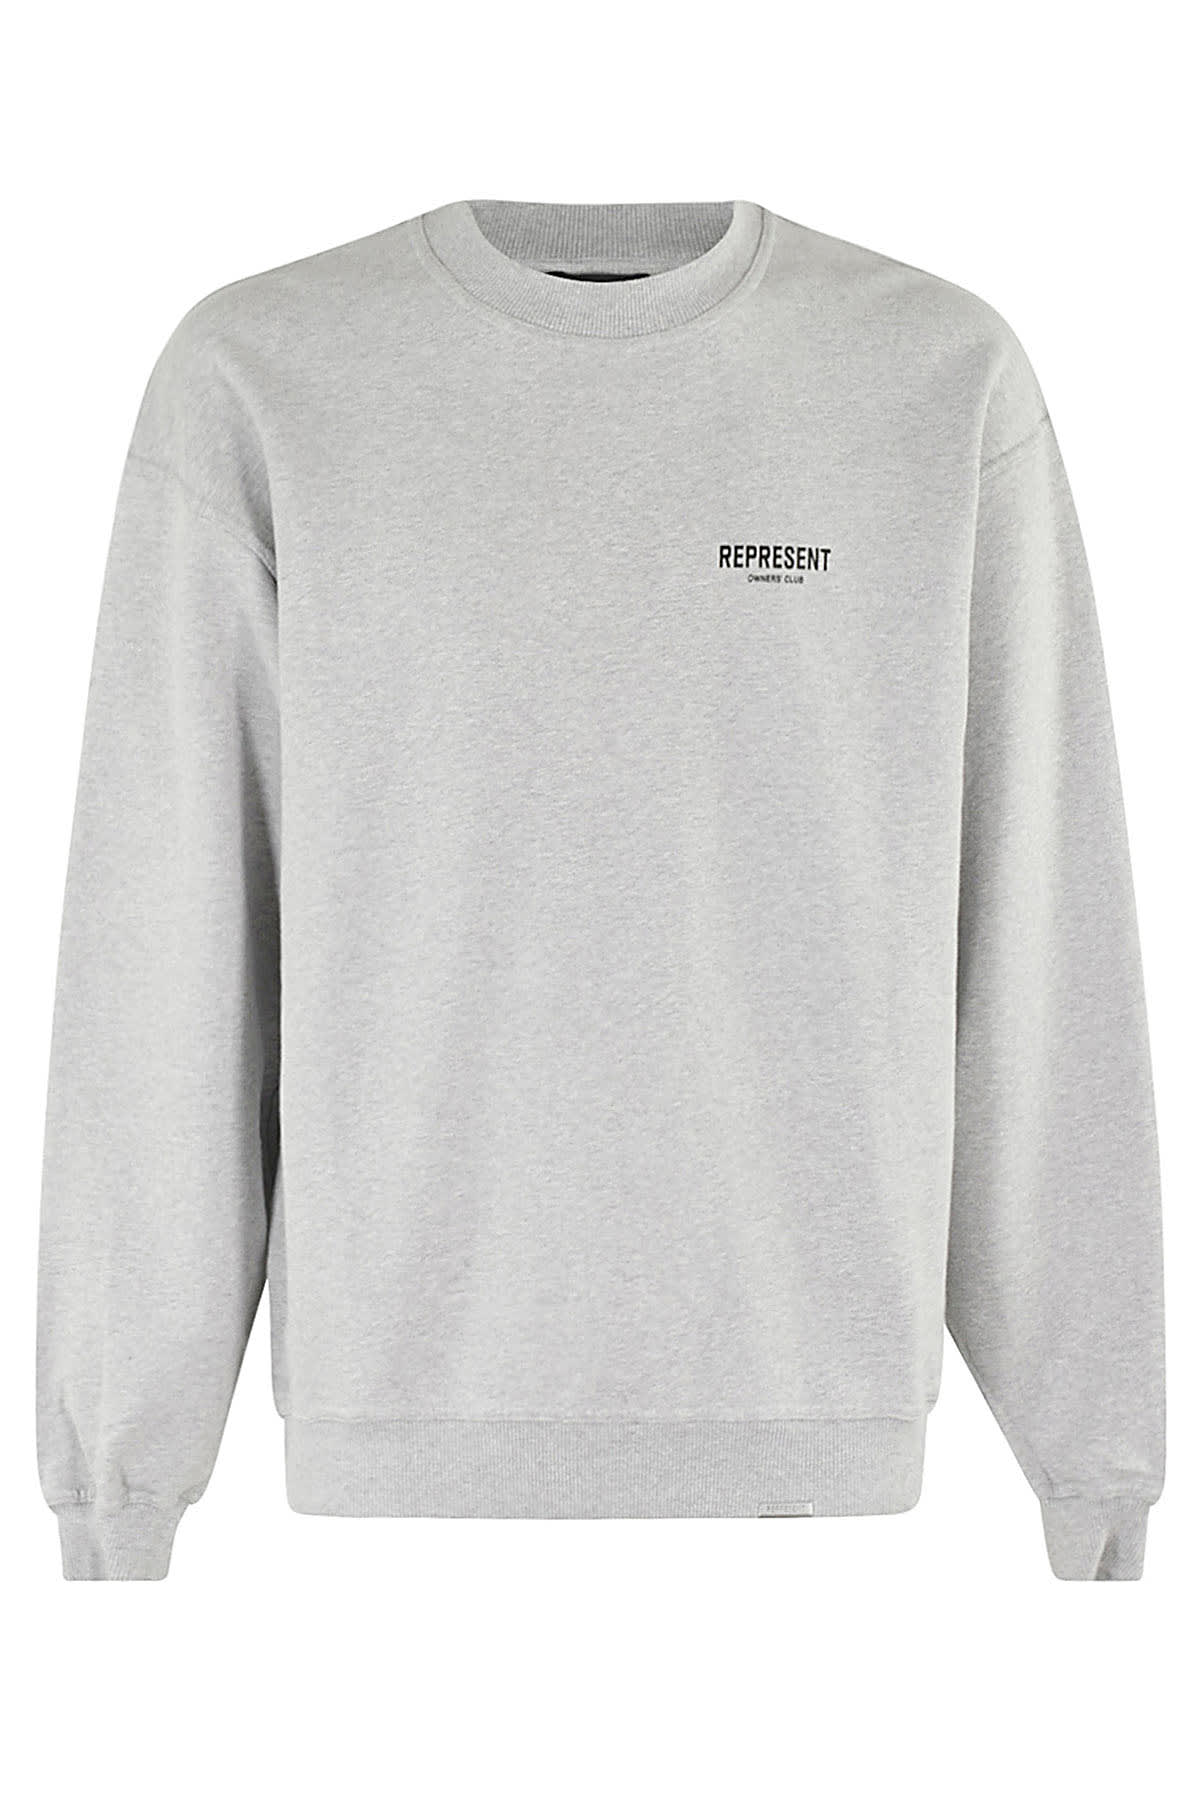 Represent Owners Club Sweater In Ash Grey Black